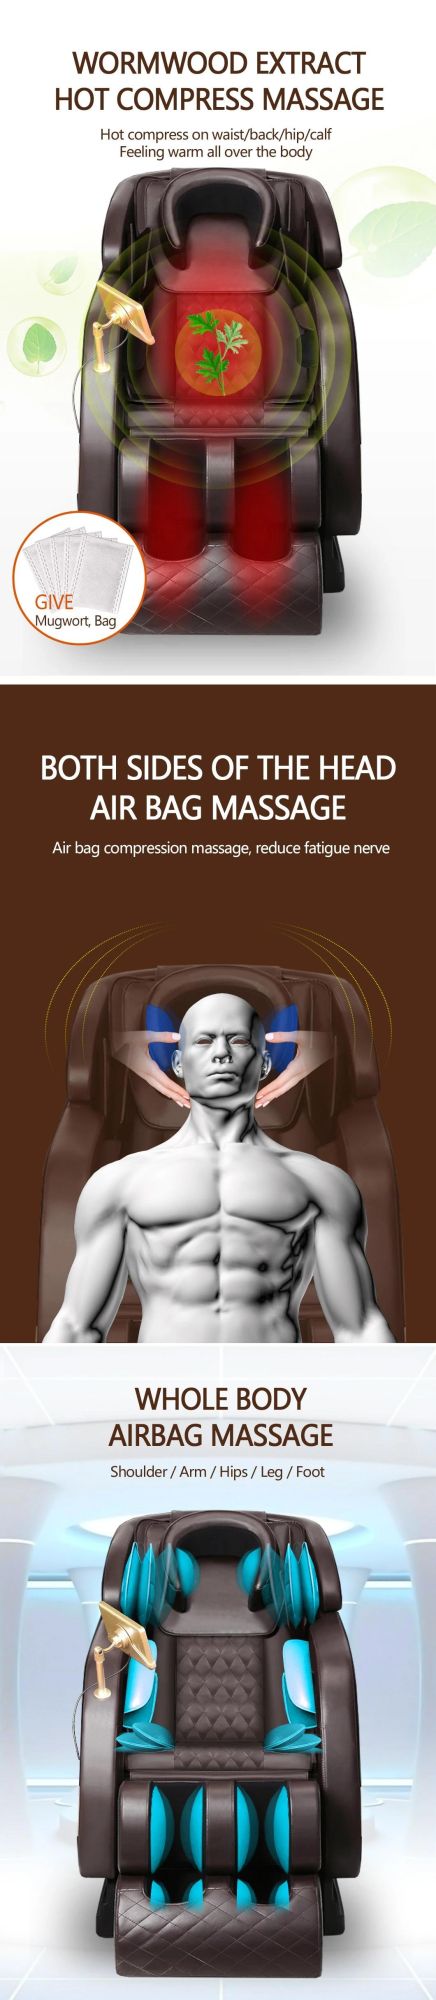 Wholesale New Design Cheap Full Body Airbag Kneading Thia Massage Chair and Leg Massager